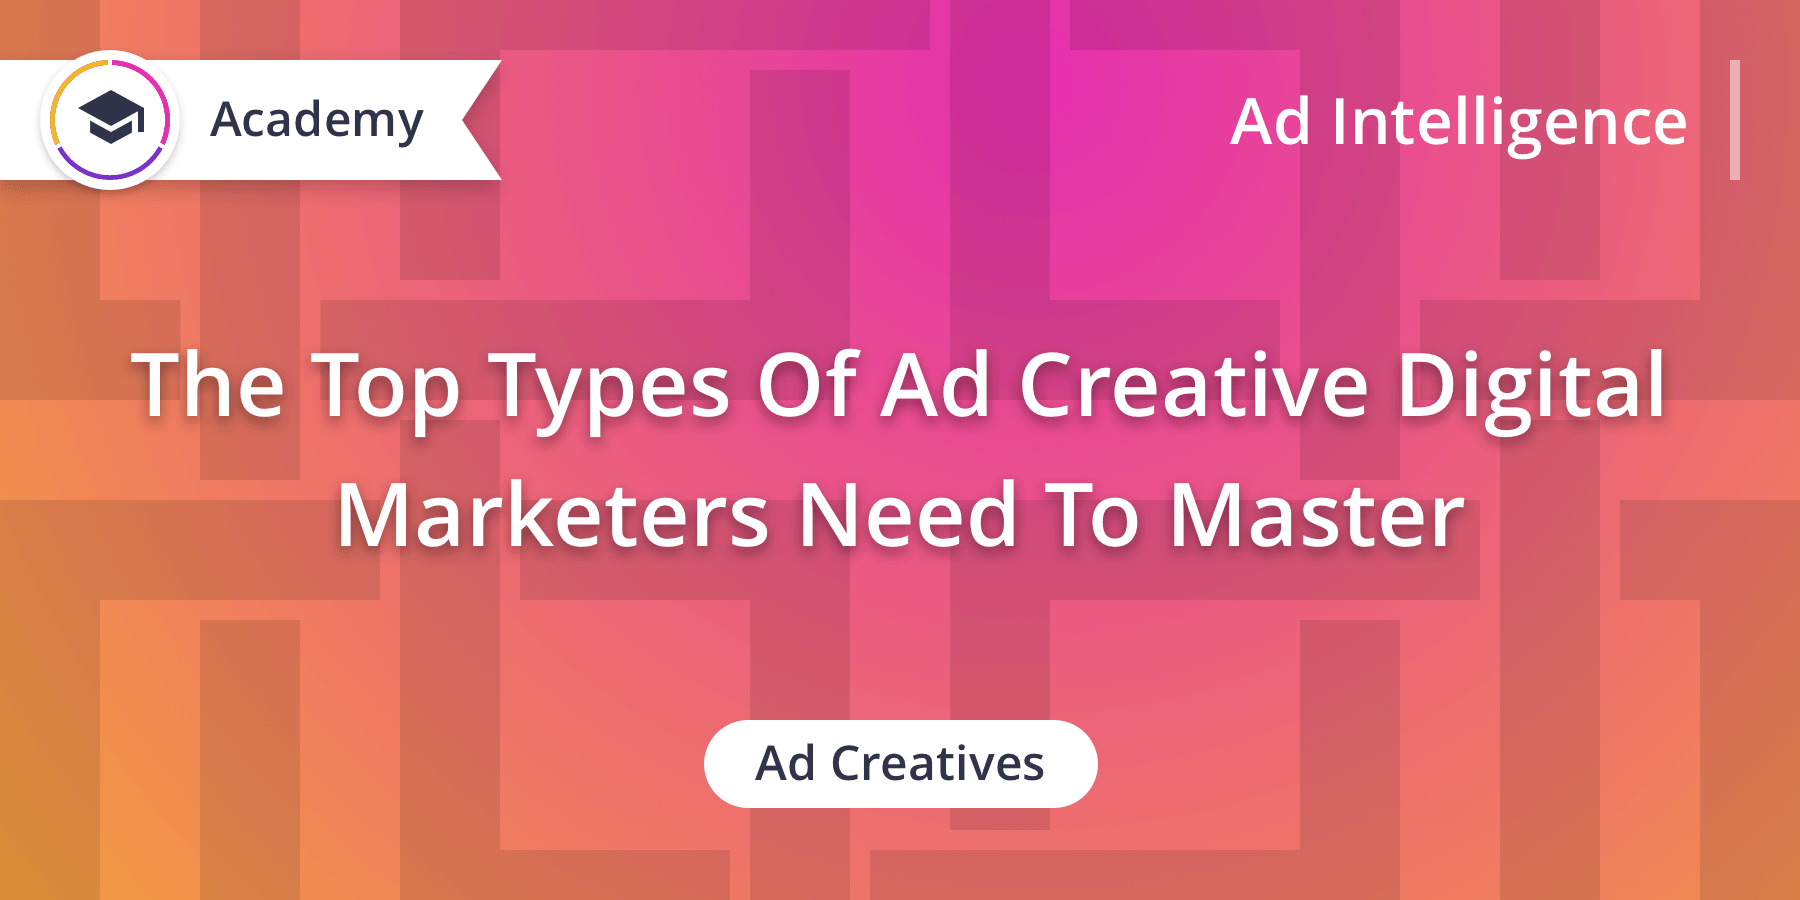 The 4 Types Of Mobile Ad Creative Every Digital Marketer Should Master